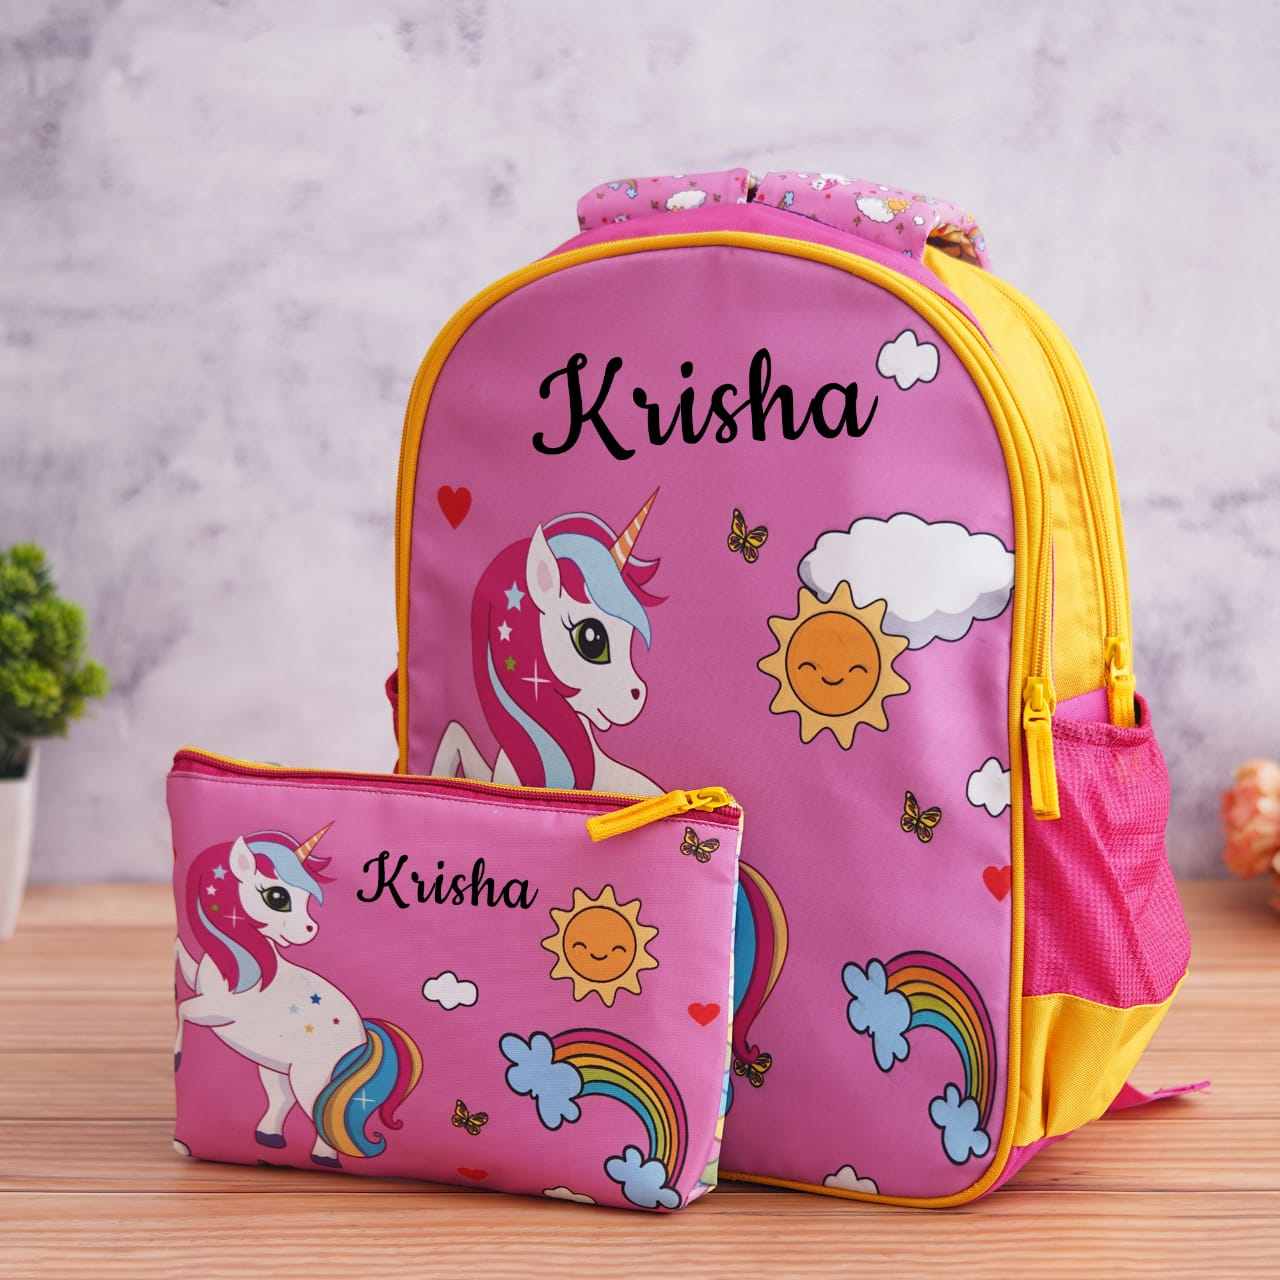 Customized School Bag With Name Printed